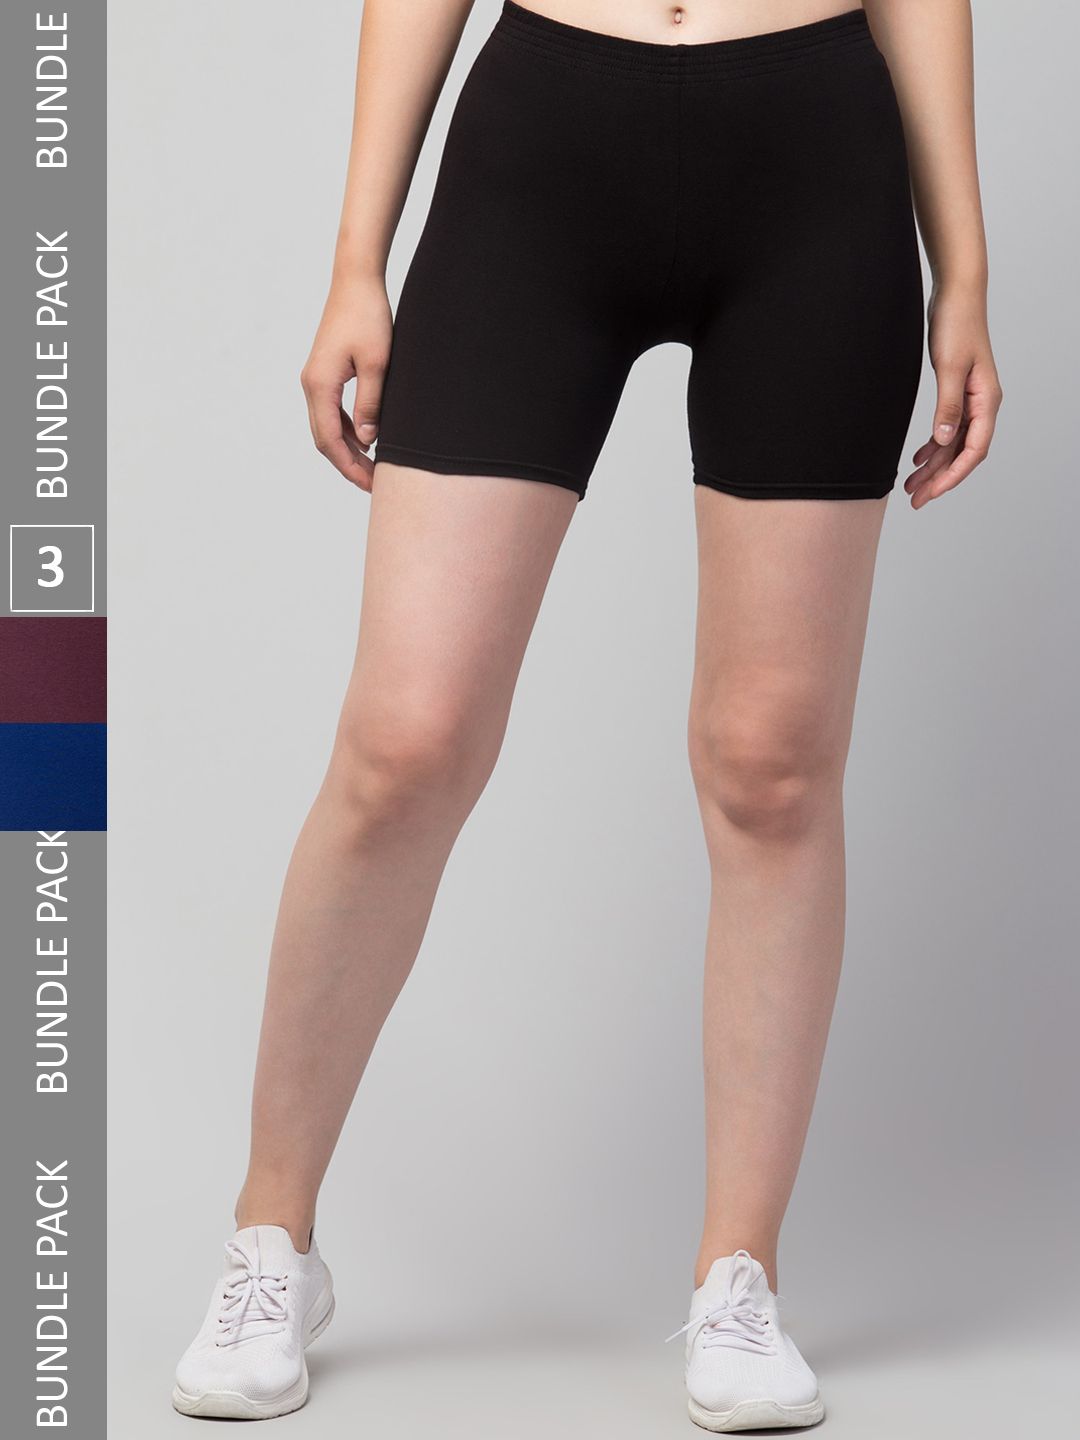 Apraa & Parma Women Black Skinny Fit Cycling Hot Pants Shorts Price in India